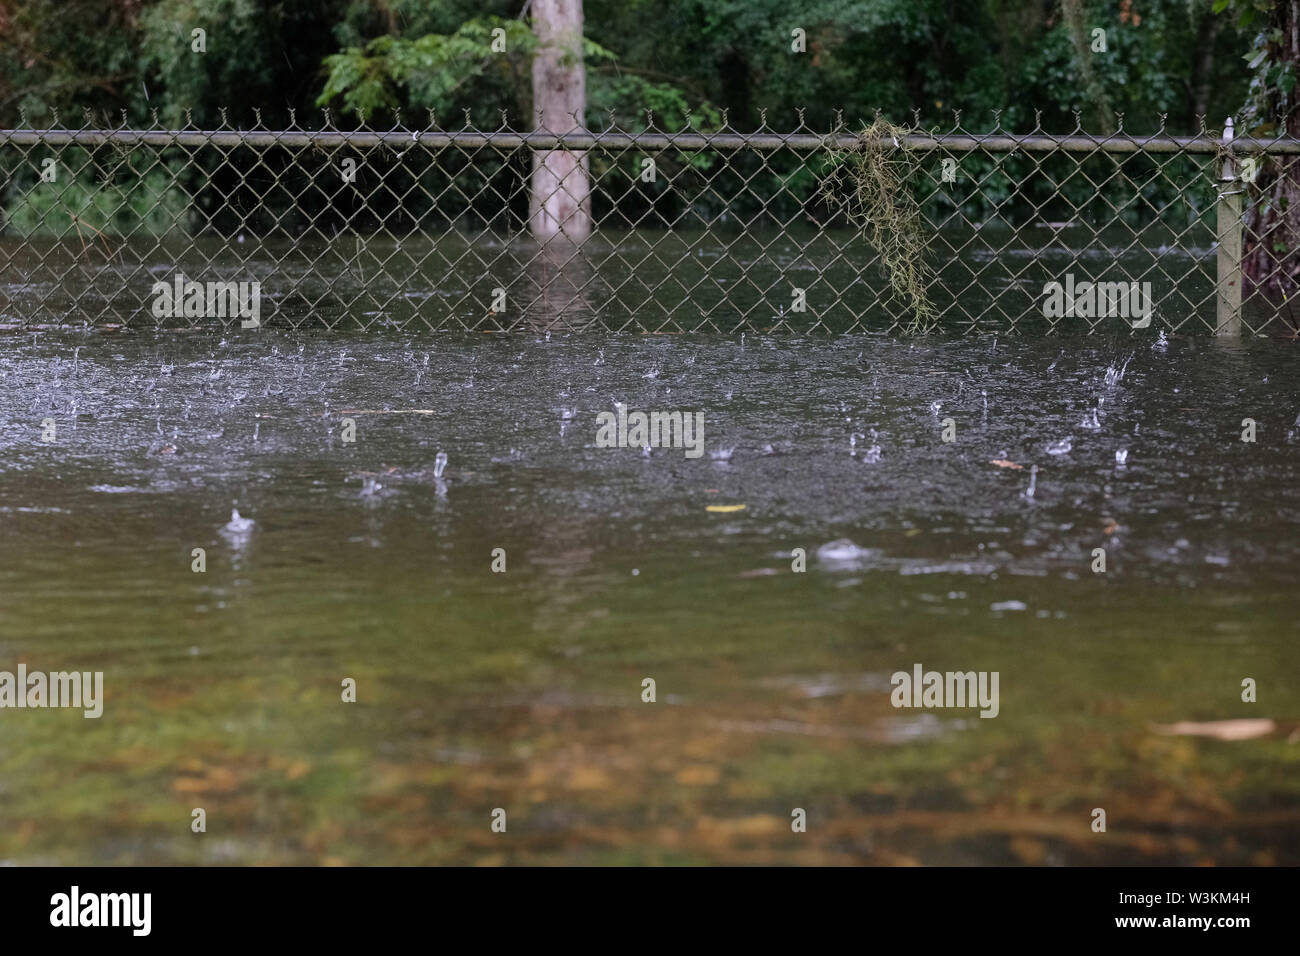 Mandeville, LOUISIANA, USA. 13th July, 2019. A fence stands in a flooded yard near Lake Pontchartrain in Mandeville, Louisiana USA as Hurricane Barry makes landfall on July 13, 2019. Credit: Dan Anderson/ZUMA Wire/Alamy Live News Stock Photo